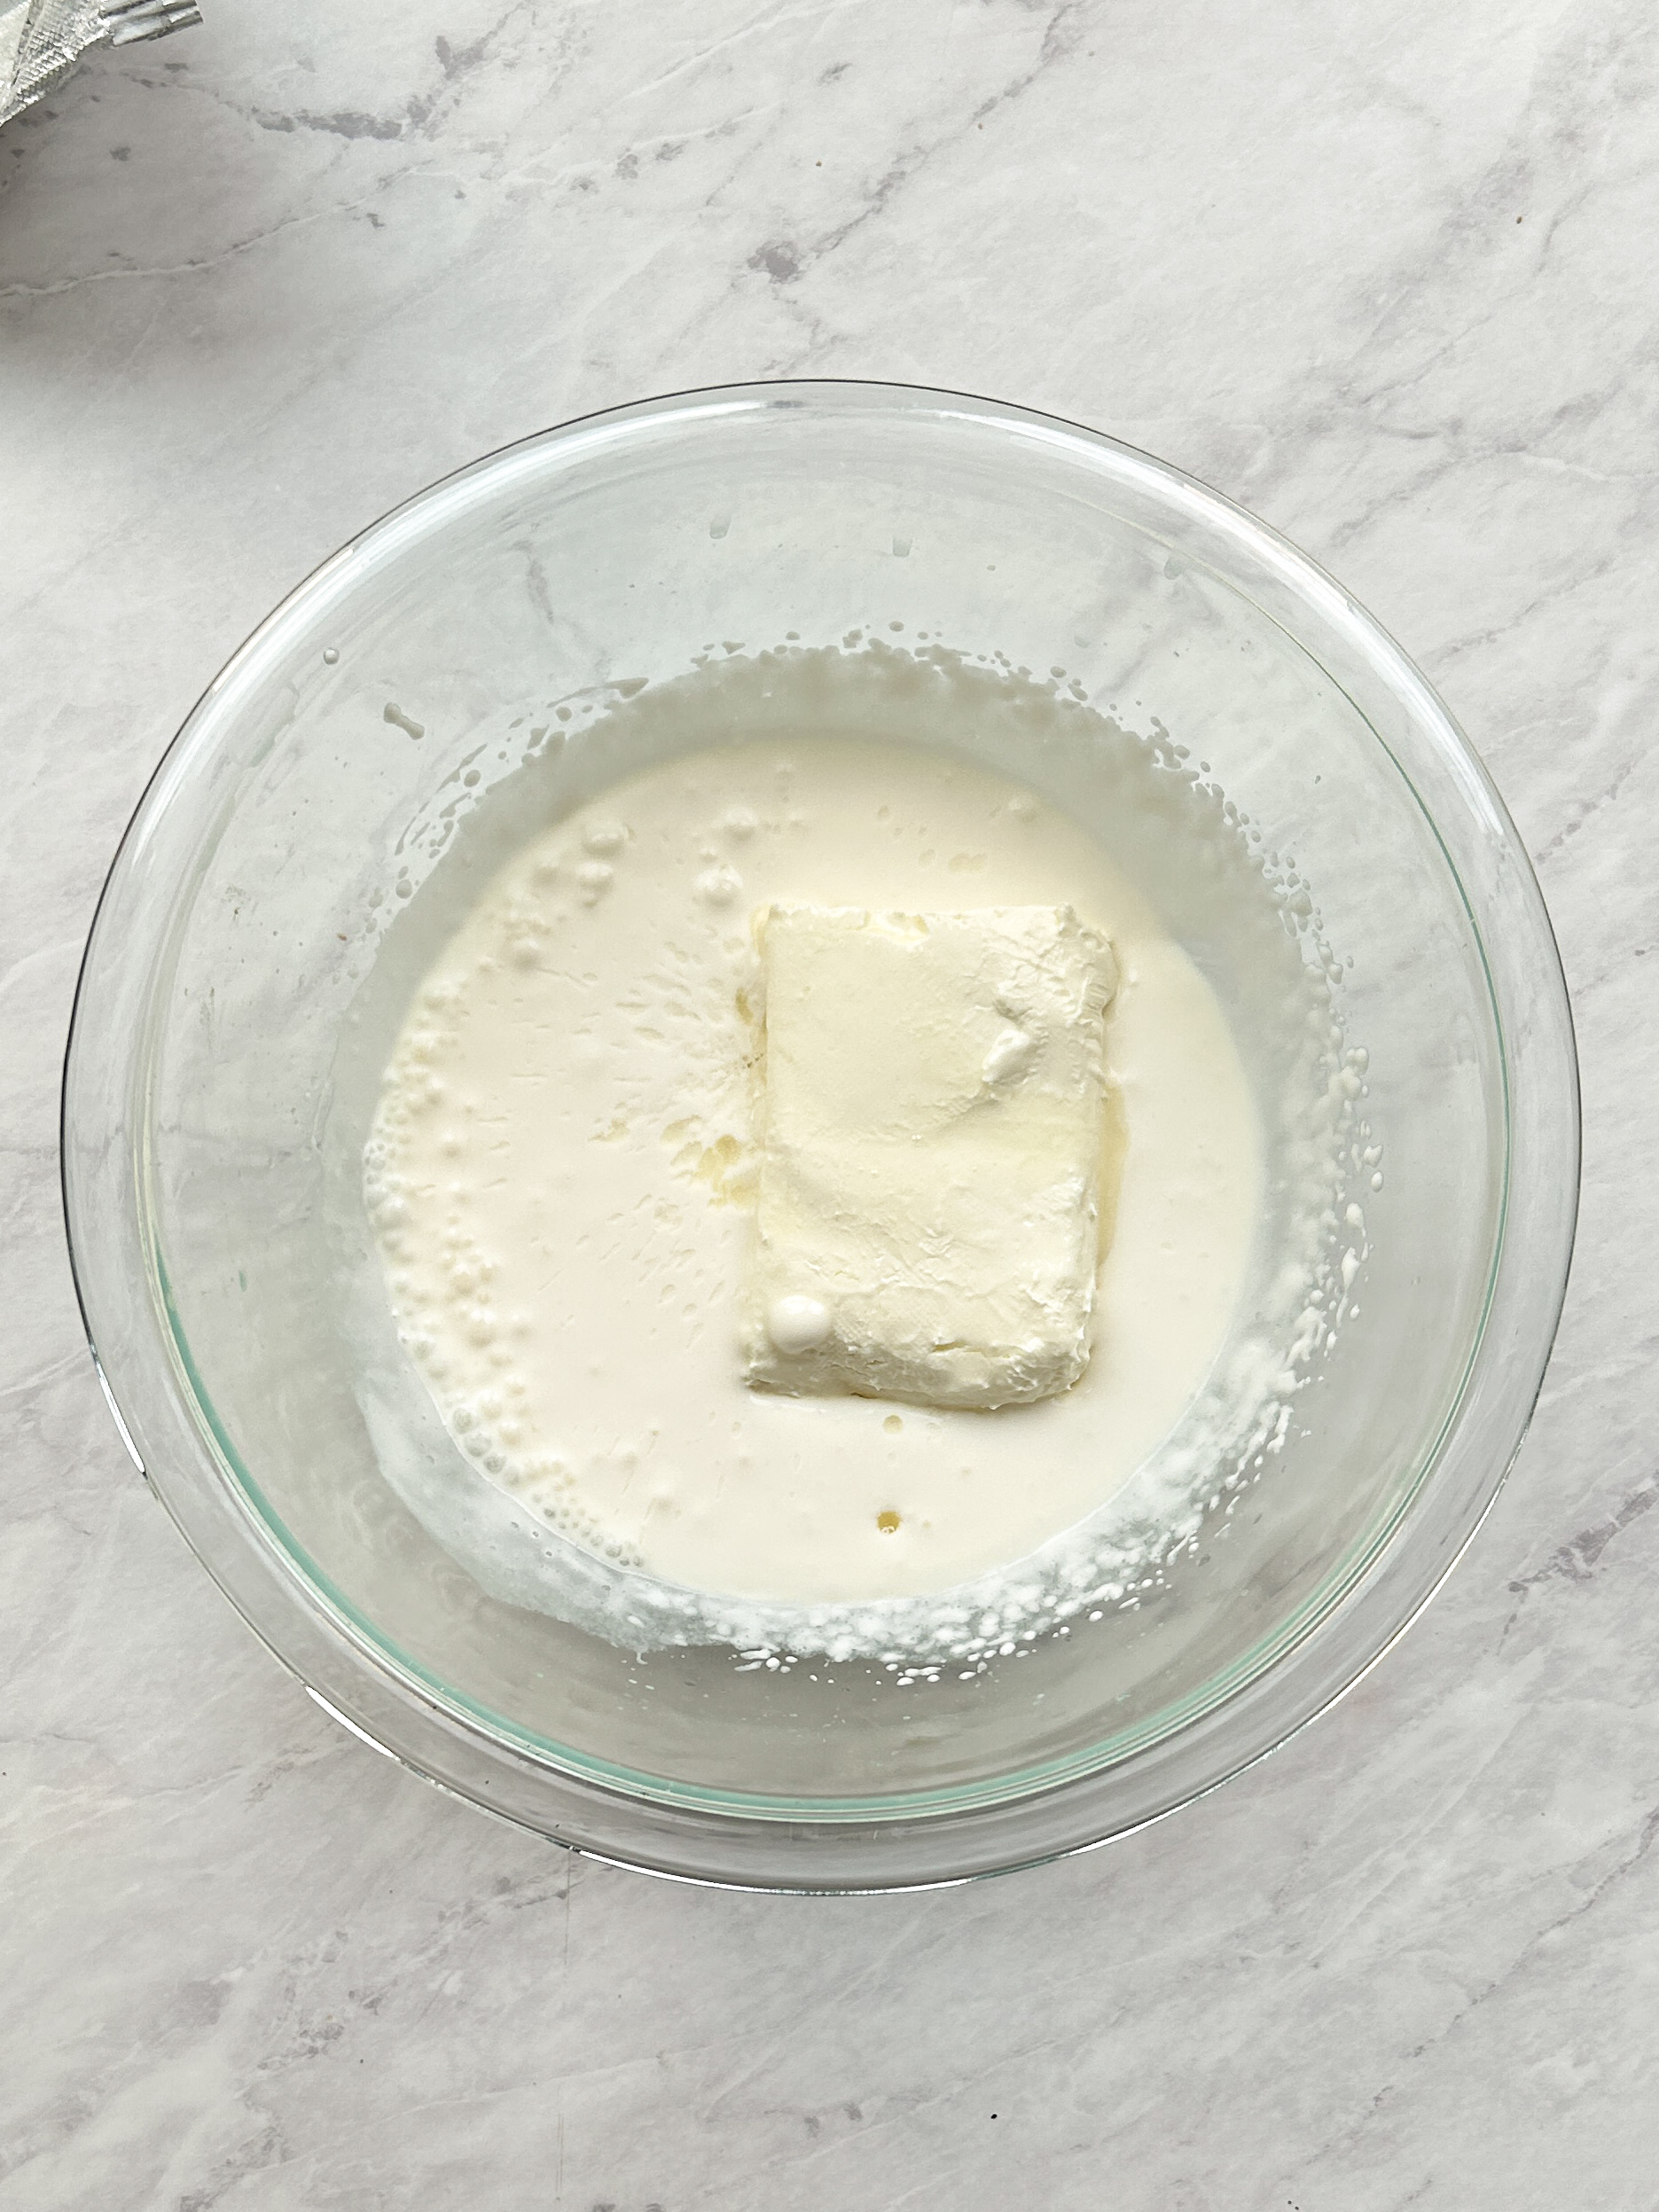 cream cheese and cream in a glass bowl